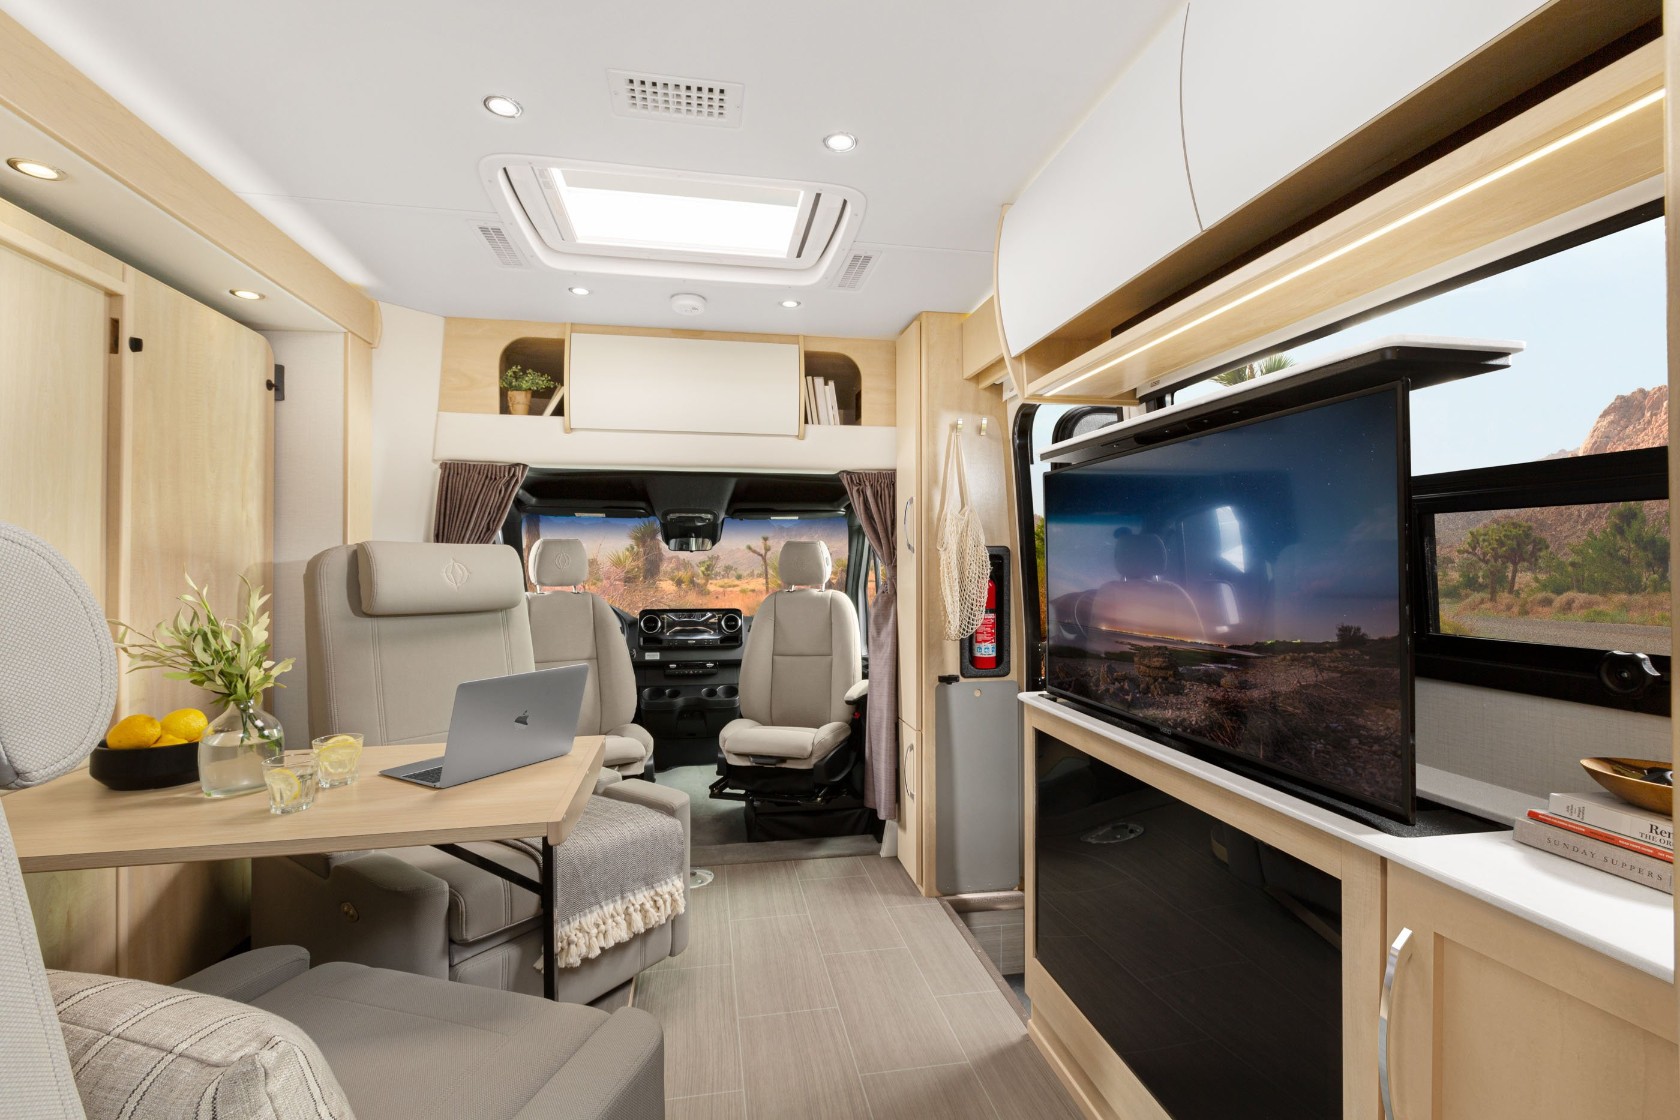 The Ridiculously Priced Unity Luxury Camper Van Puts All Others to ...